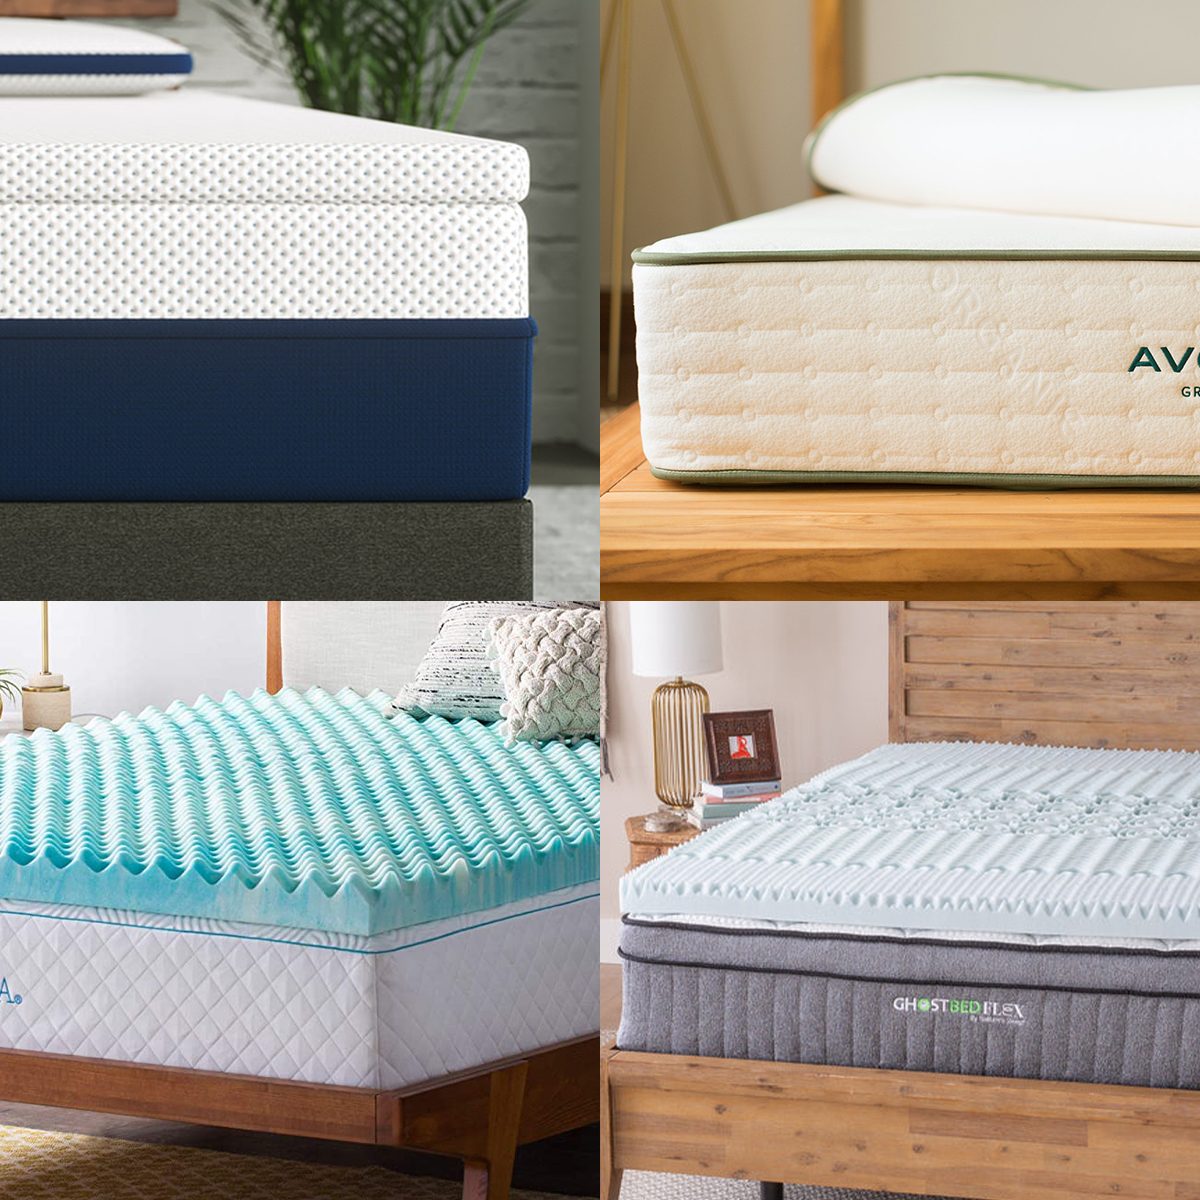 The 8 Best Mattress Topper Picks, According To Sleep Experts